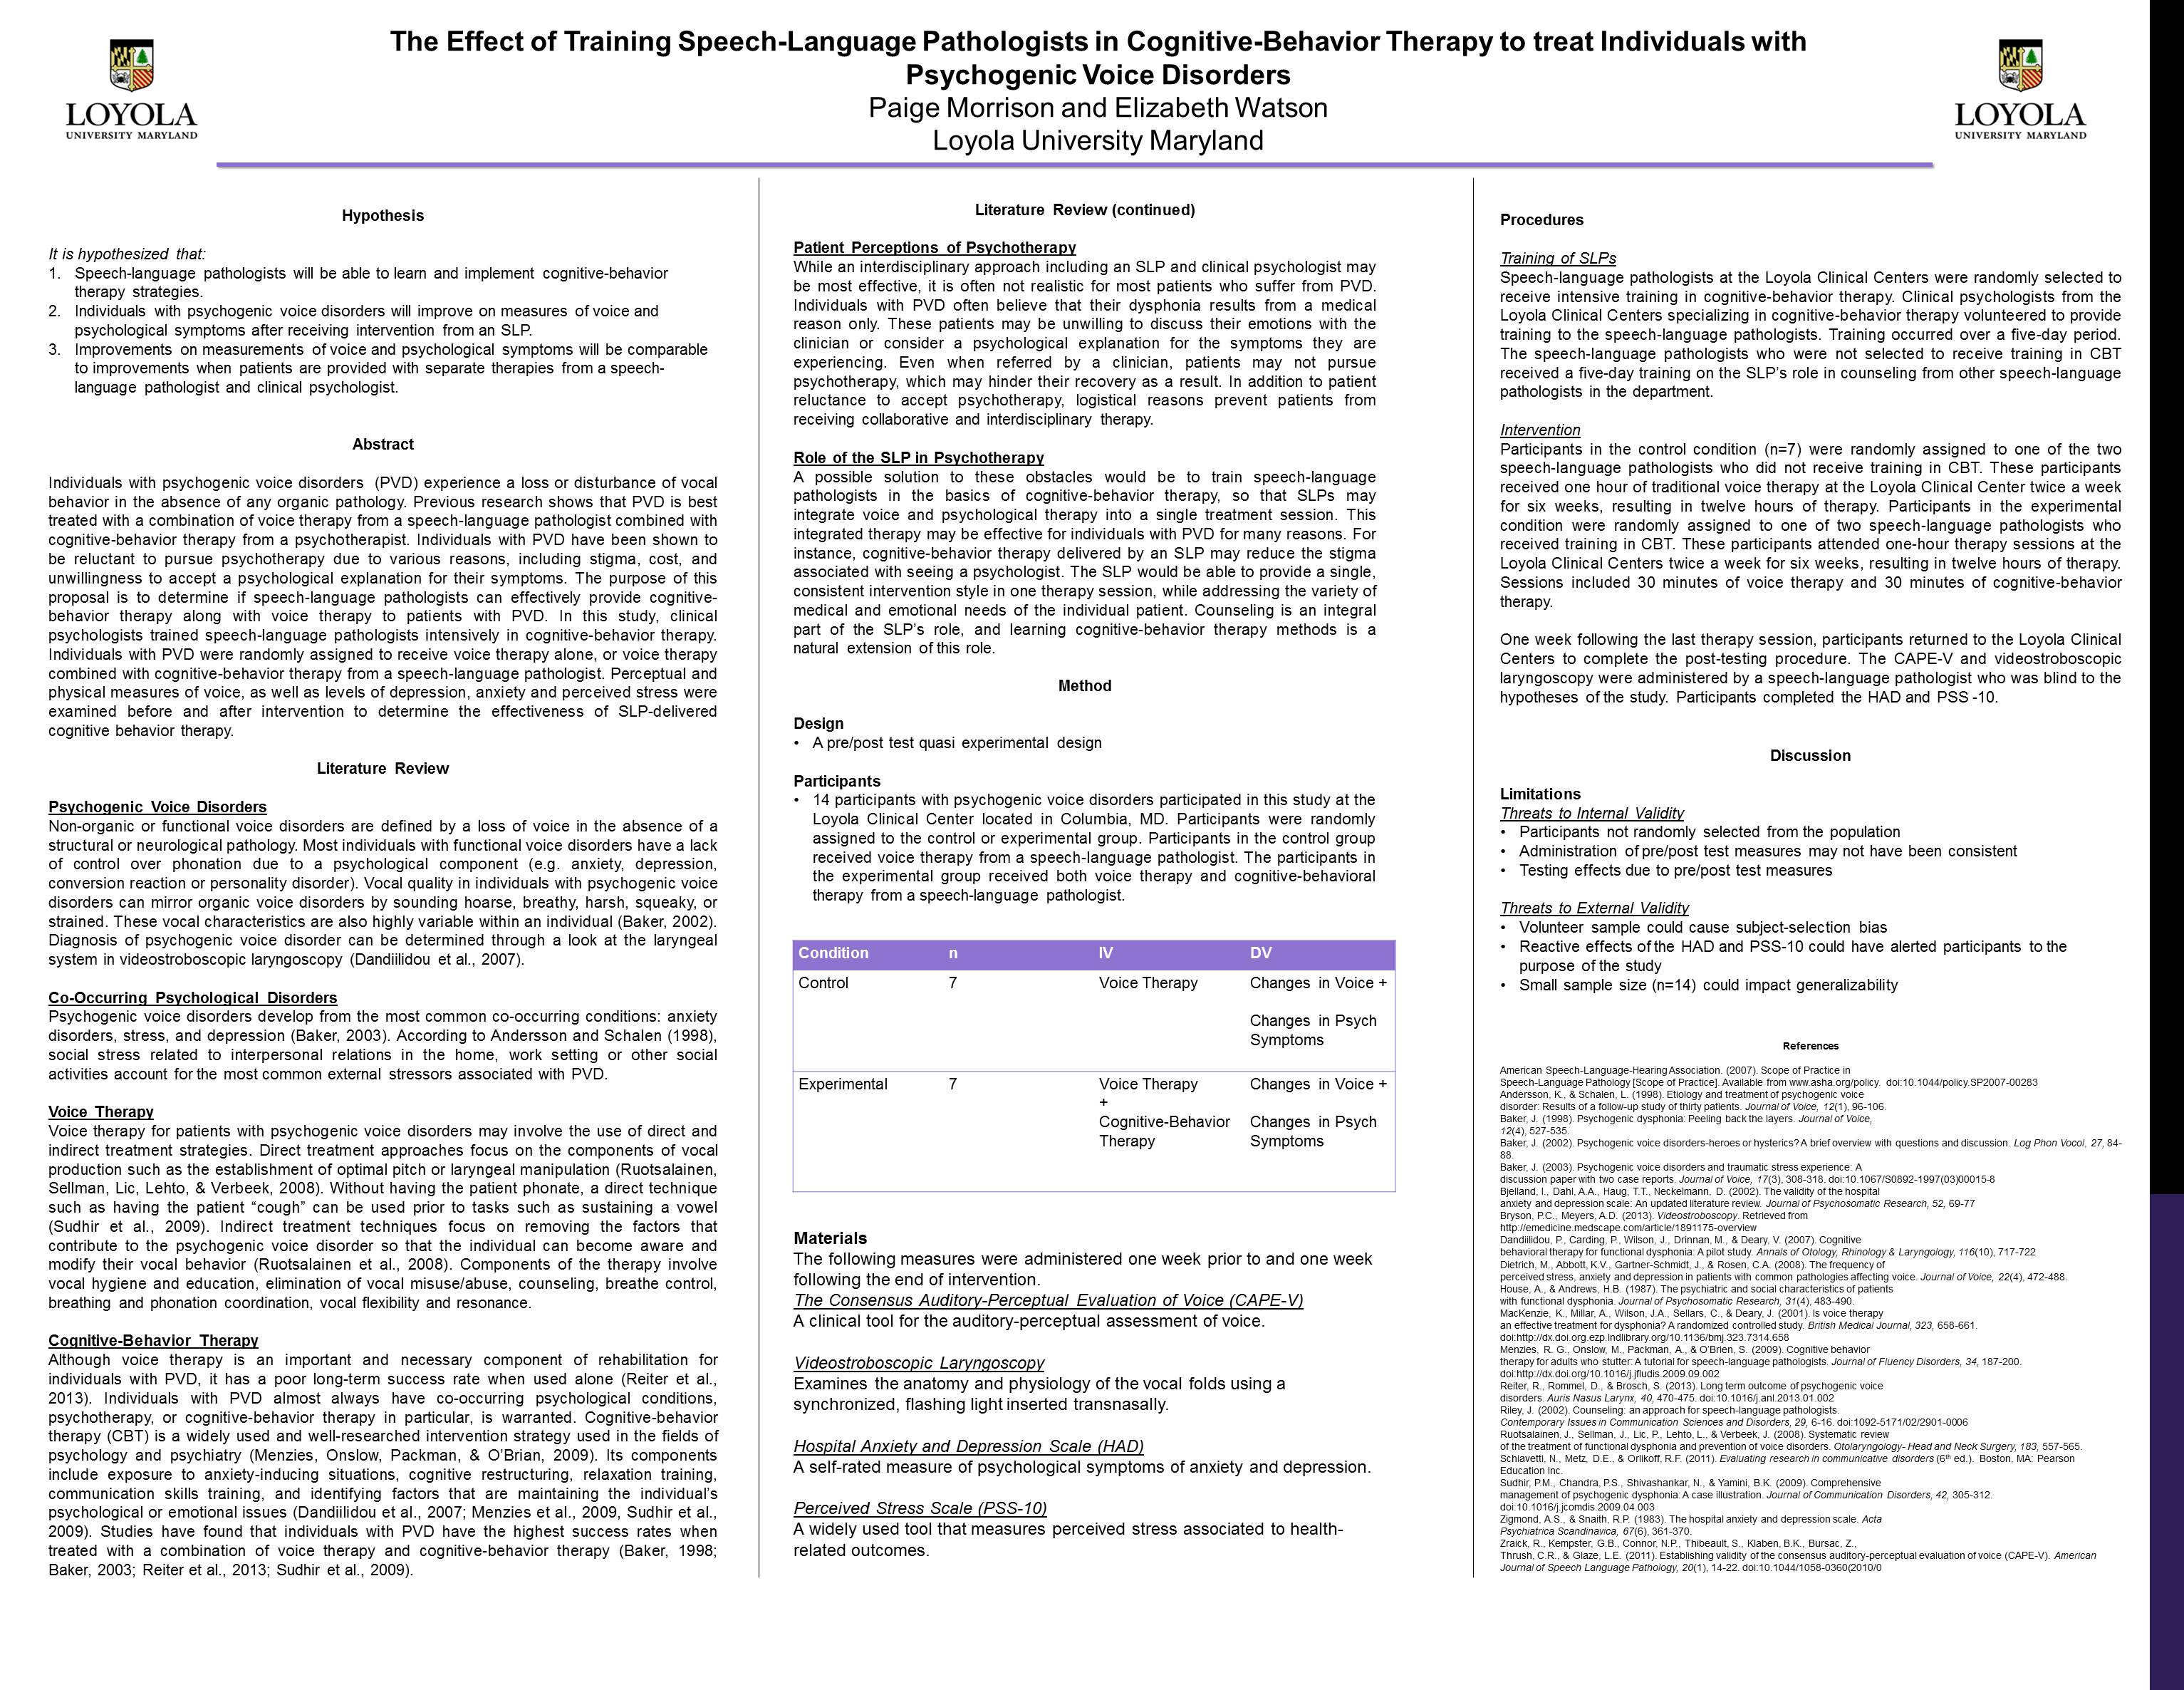 poster image: 'The Effect of Training Speech-Language Pathologists in Cognitive-Behavior Therapy to Treat Individuals with Psychogenic Voice Disorders'